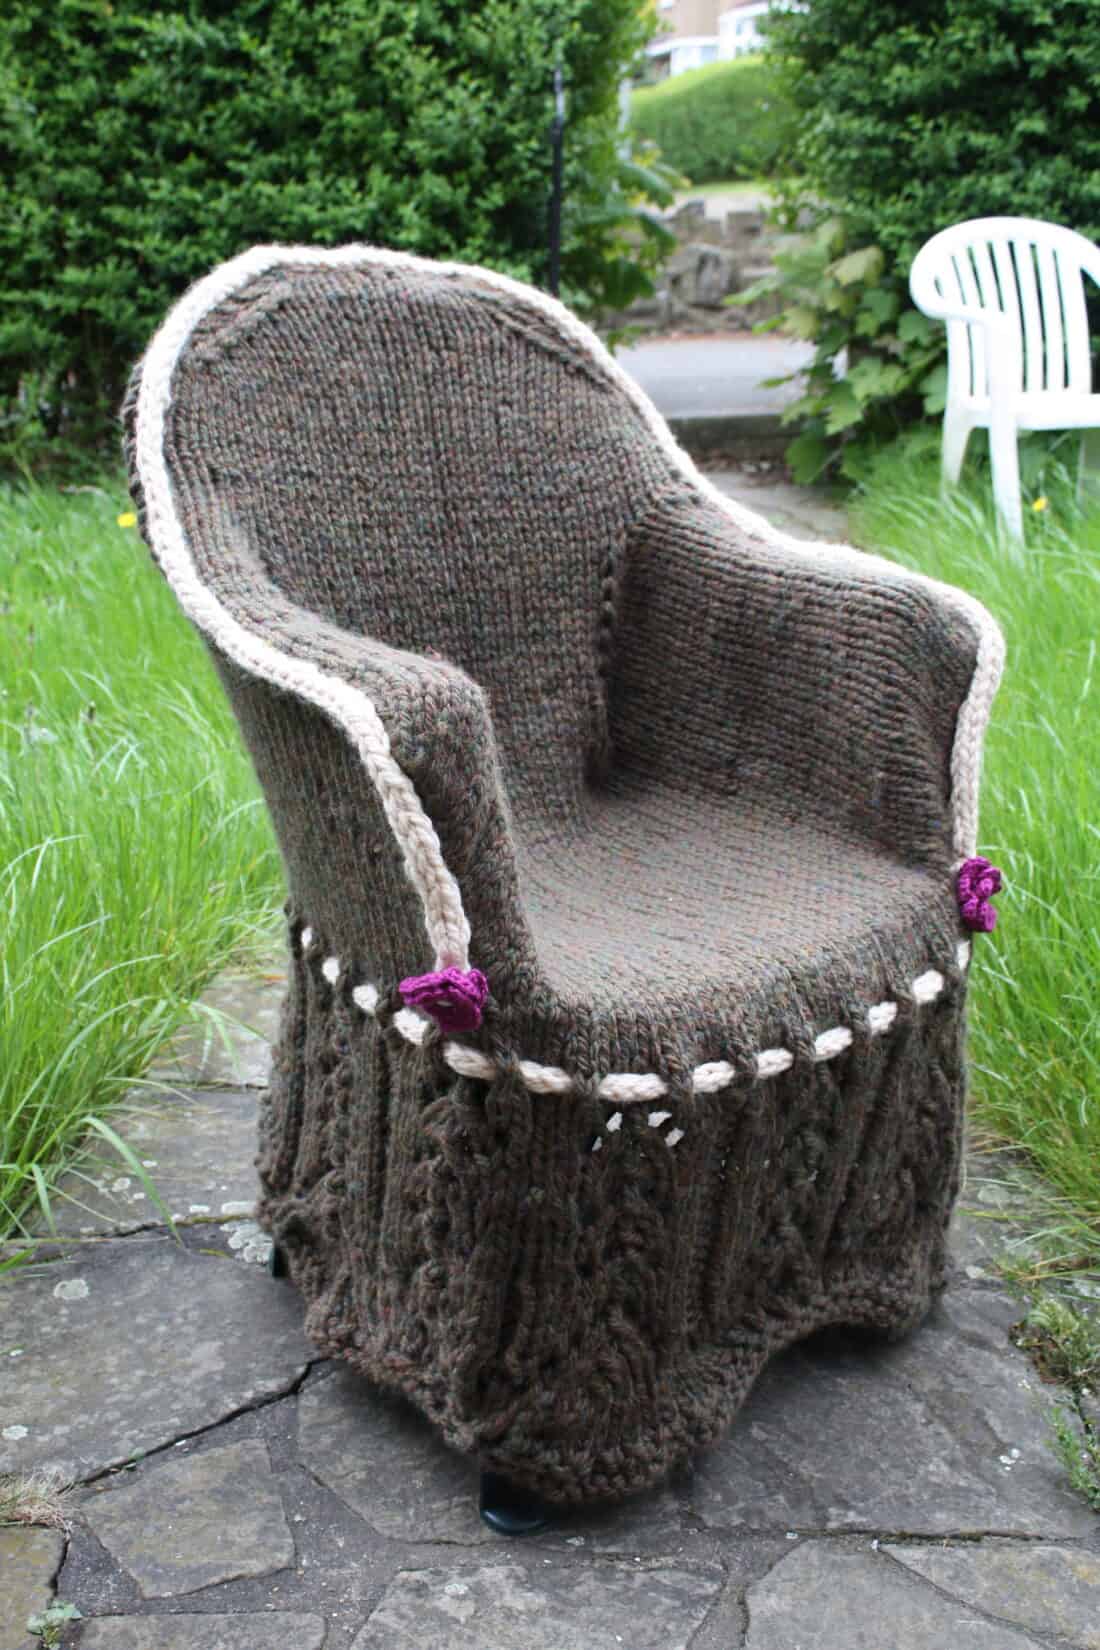 Knitted cover on an outdoor chair adorned with flowers and decorative trim.